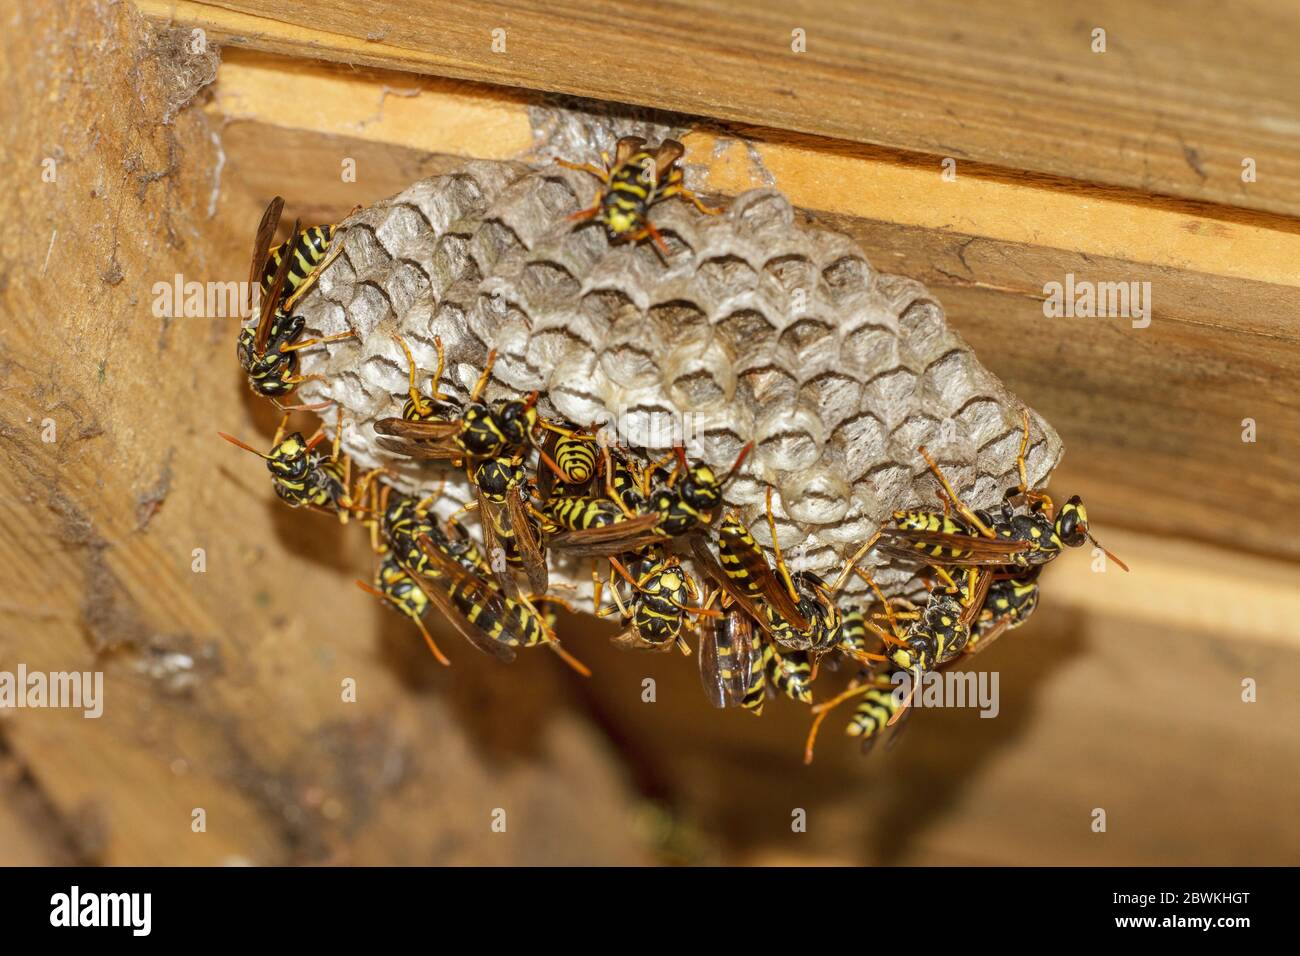 Paper wasp (Polistes gallica, Polistes dominula), hard-working wasps at the nest, Germany Stock Photo